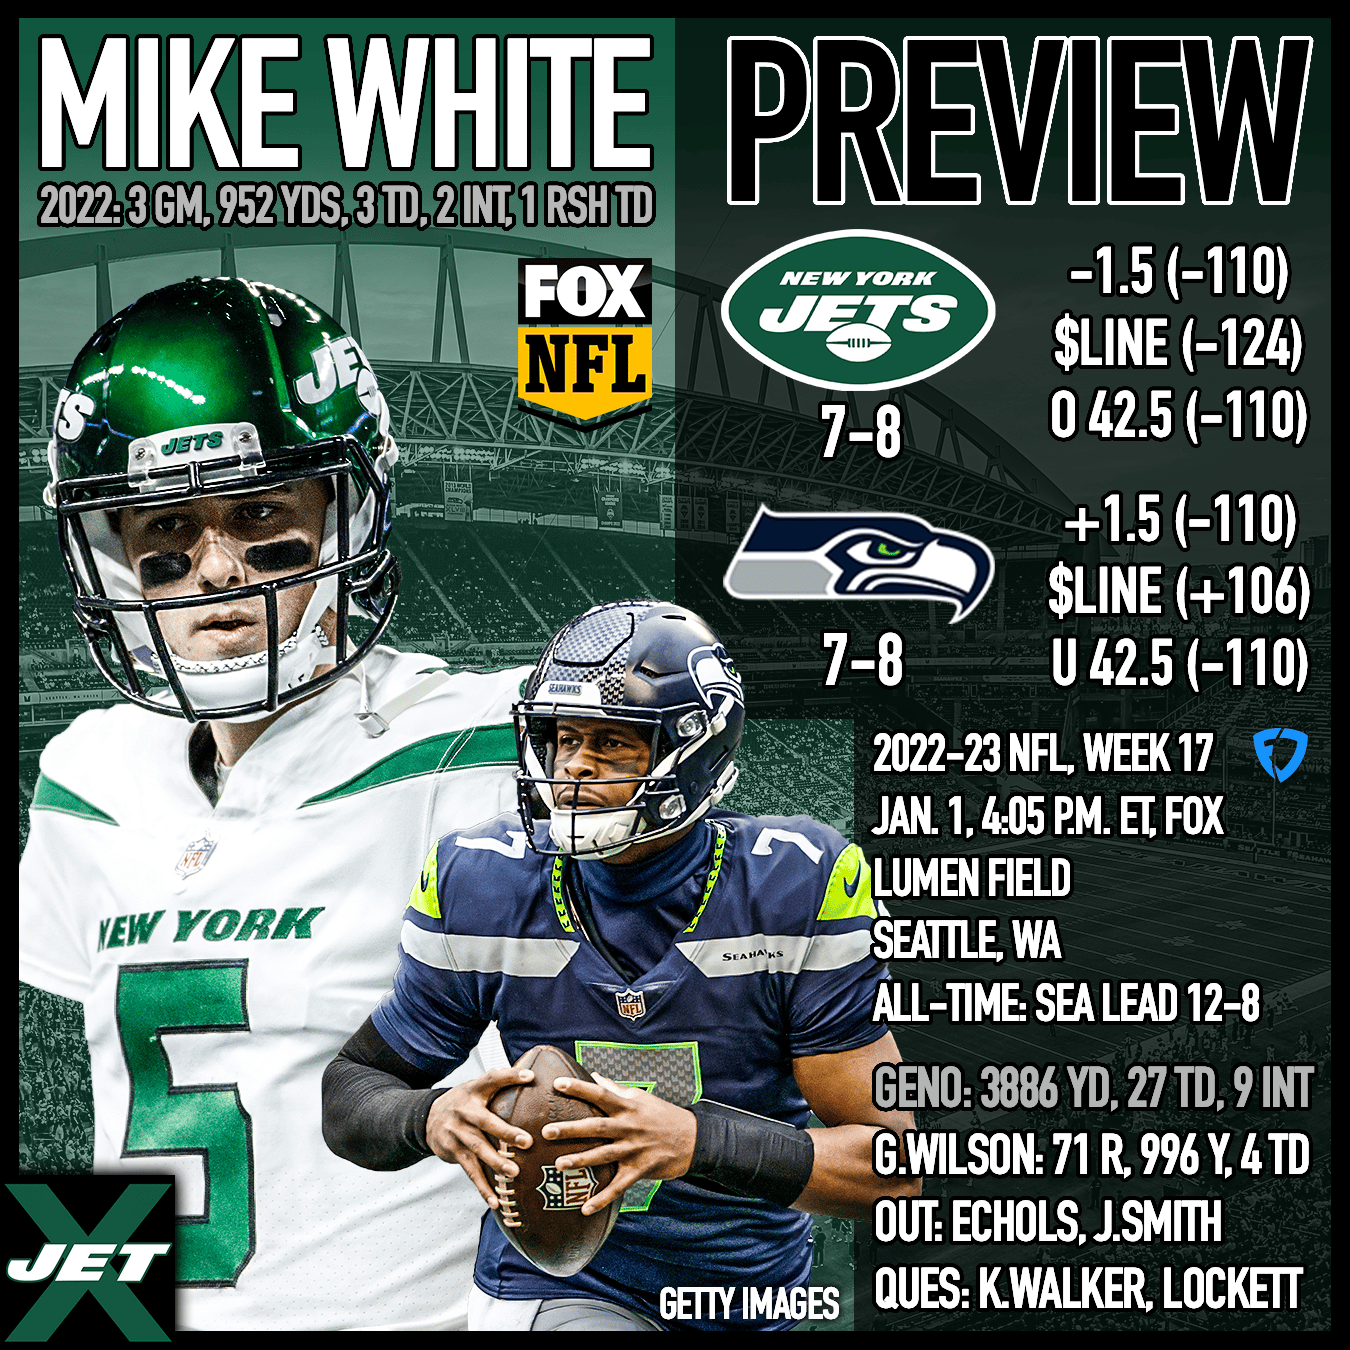 New York Jets, Seattle Seahawks, 2022-23, Week 17 preview, Mike White, Geno Smith